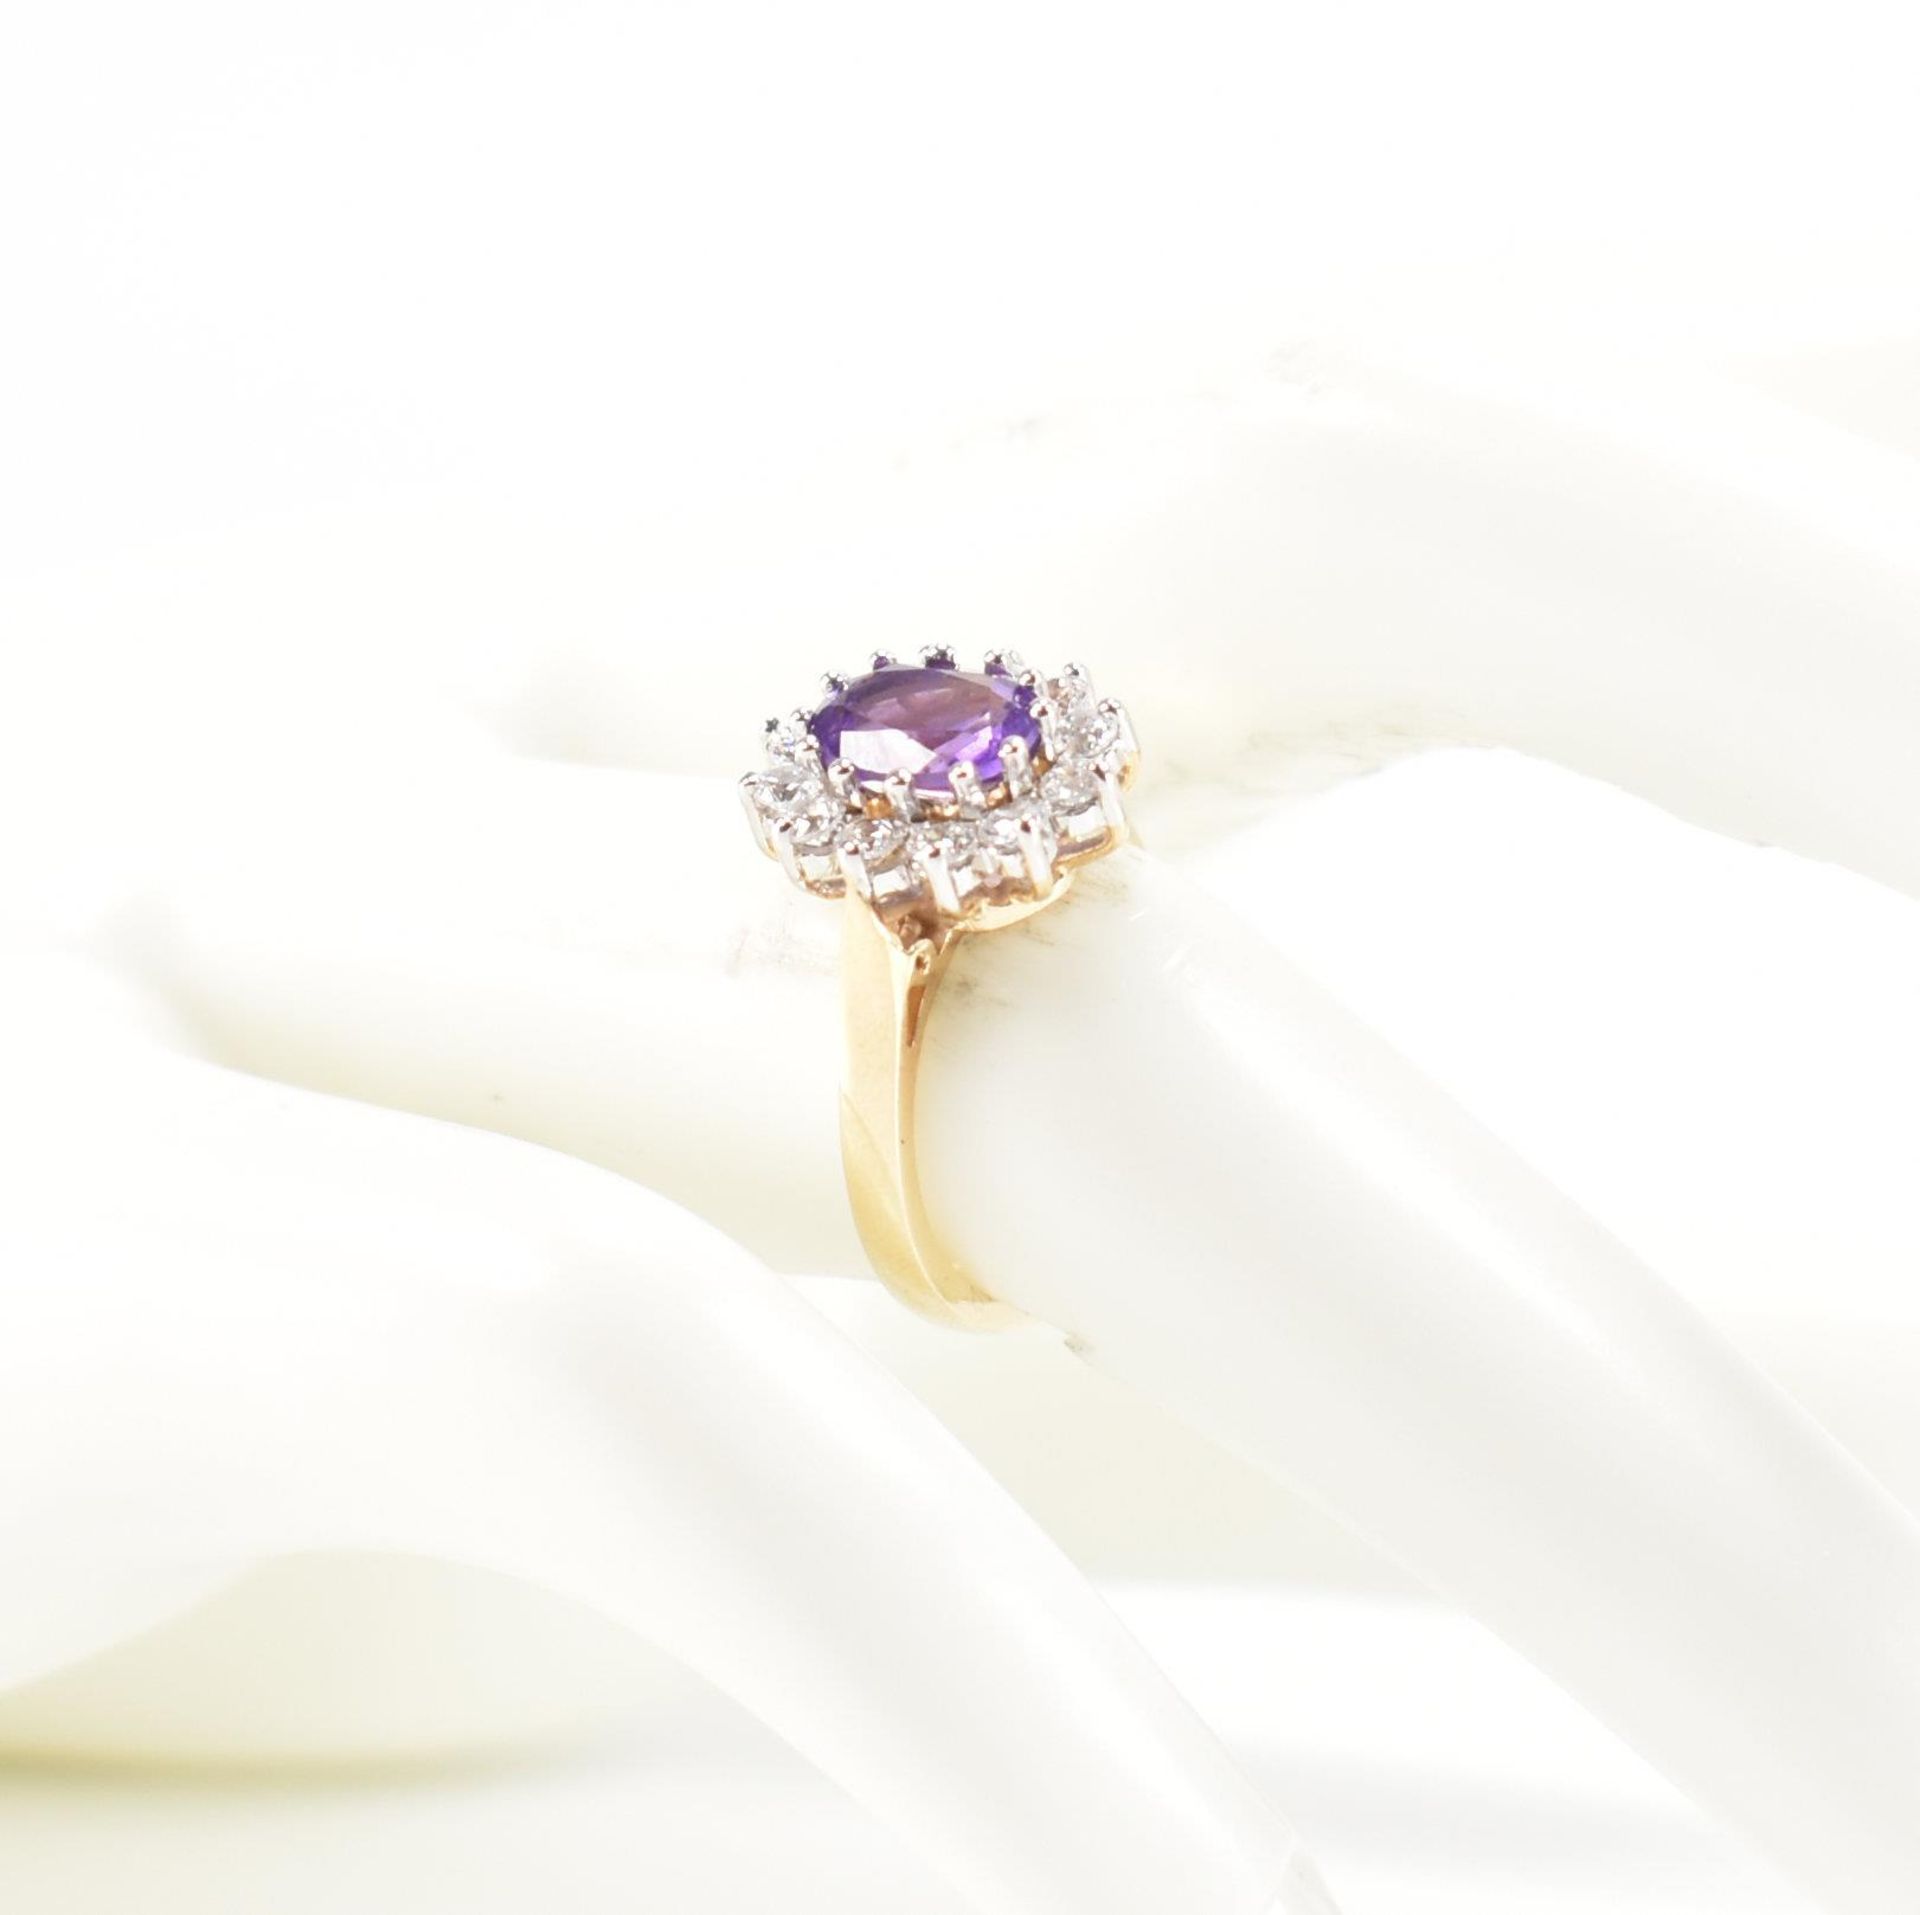 HALLMARKED 9CT GOLD AMETHYST & CZ CLUSTER RING - Image 8 of 8